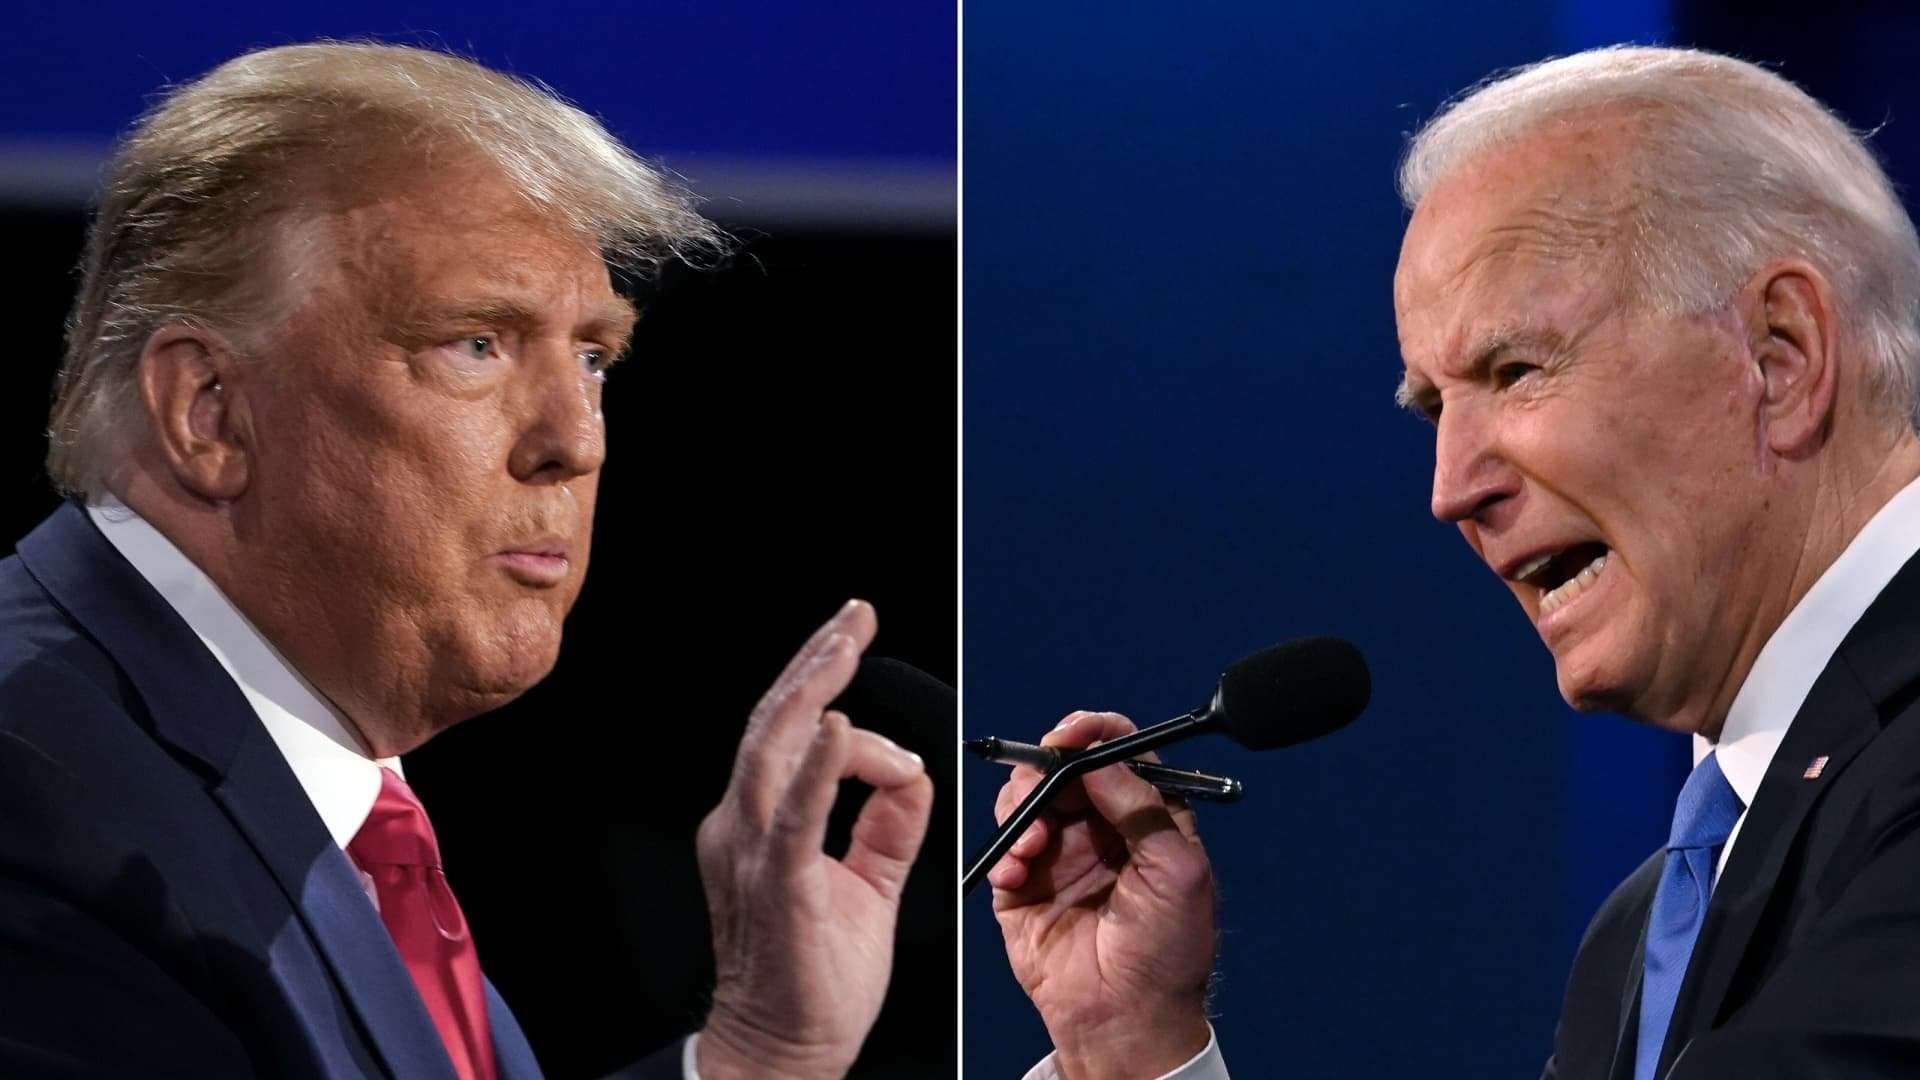 image for Trump wants to debate Biden 'immediately' — but president shrugs him off